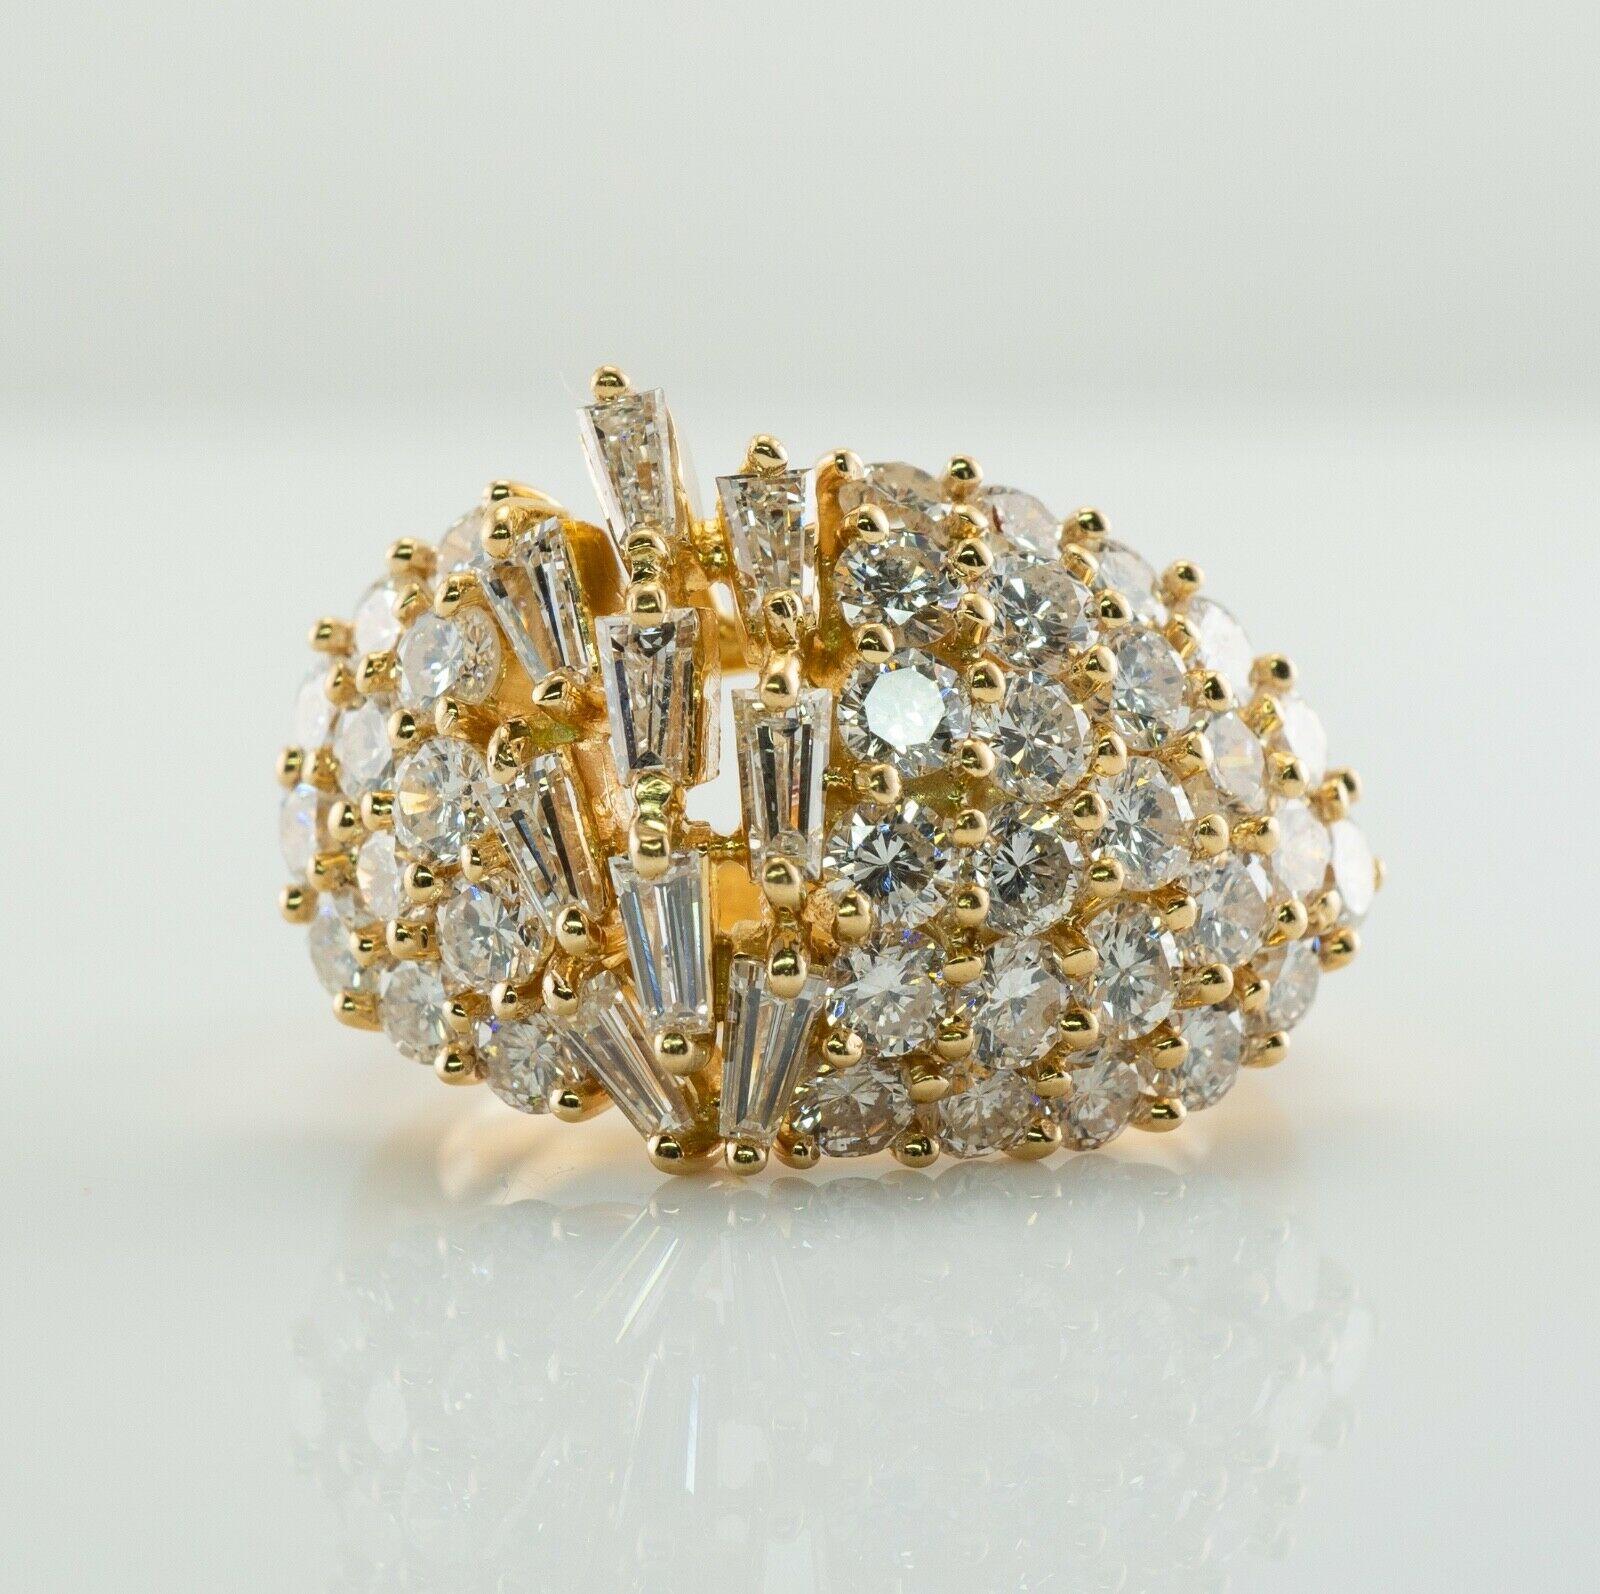 This incredible ring is finely crafted in solid 18K Yellow Gold. Twenty five on one side and twelve diamonds on another side are round brilliant cut gems totaling 1.70 carats. Nine tapered diamonds total .45 carat. The grand total for all diamonds